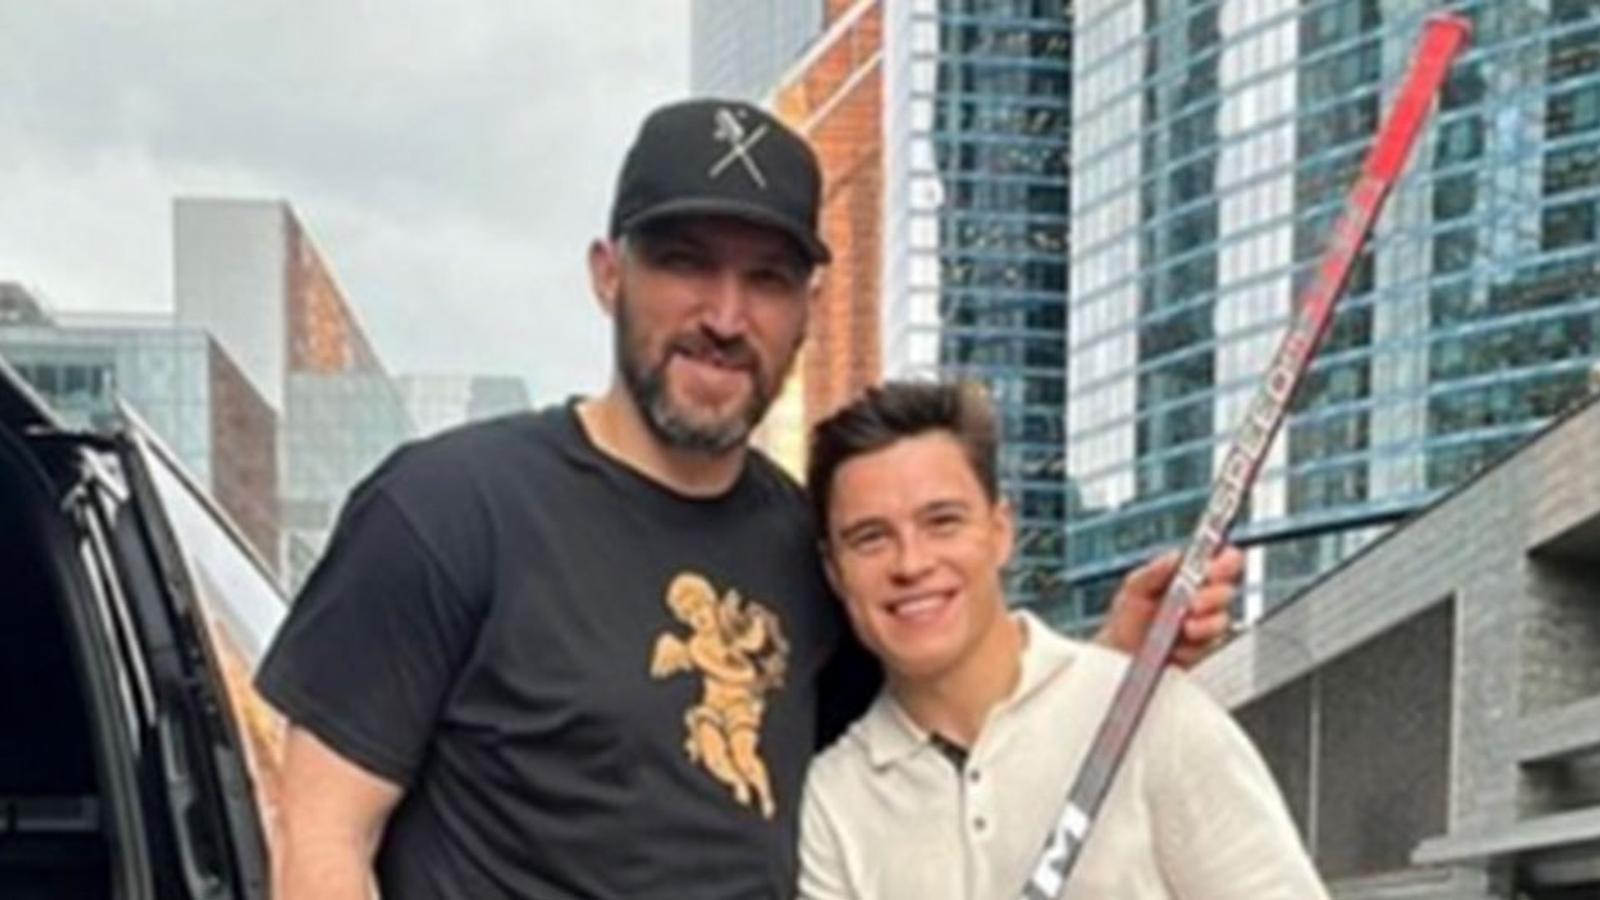 Ovechkin shares photo of him hanging out with head of Putin's Youth Army